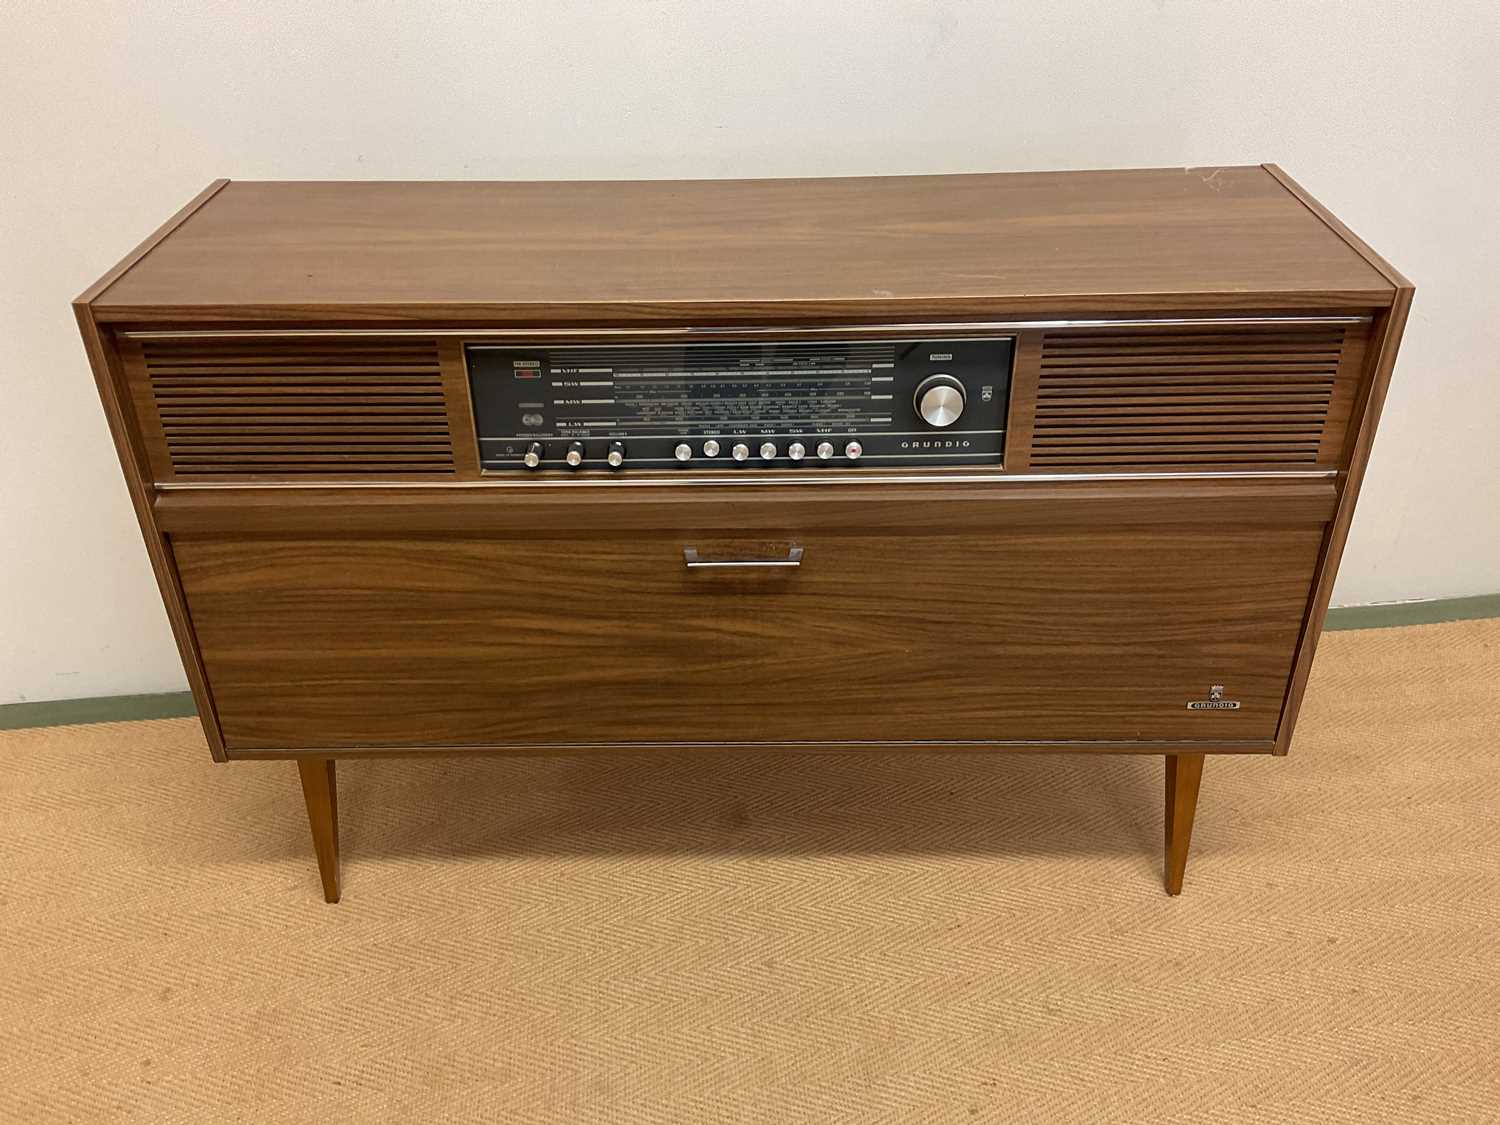 GRUNDIG; a cabinet stereo system.